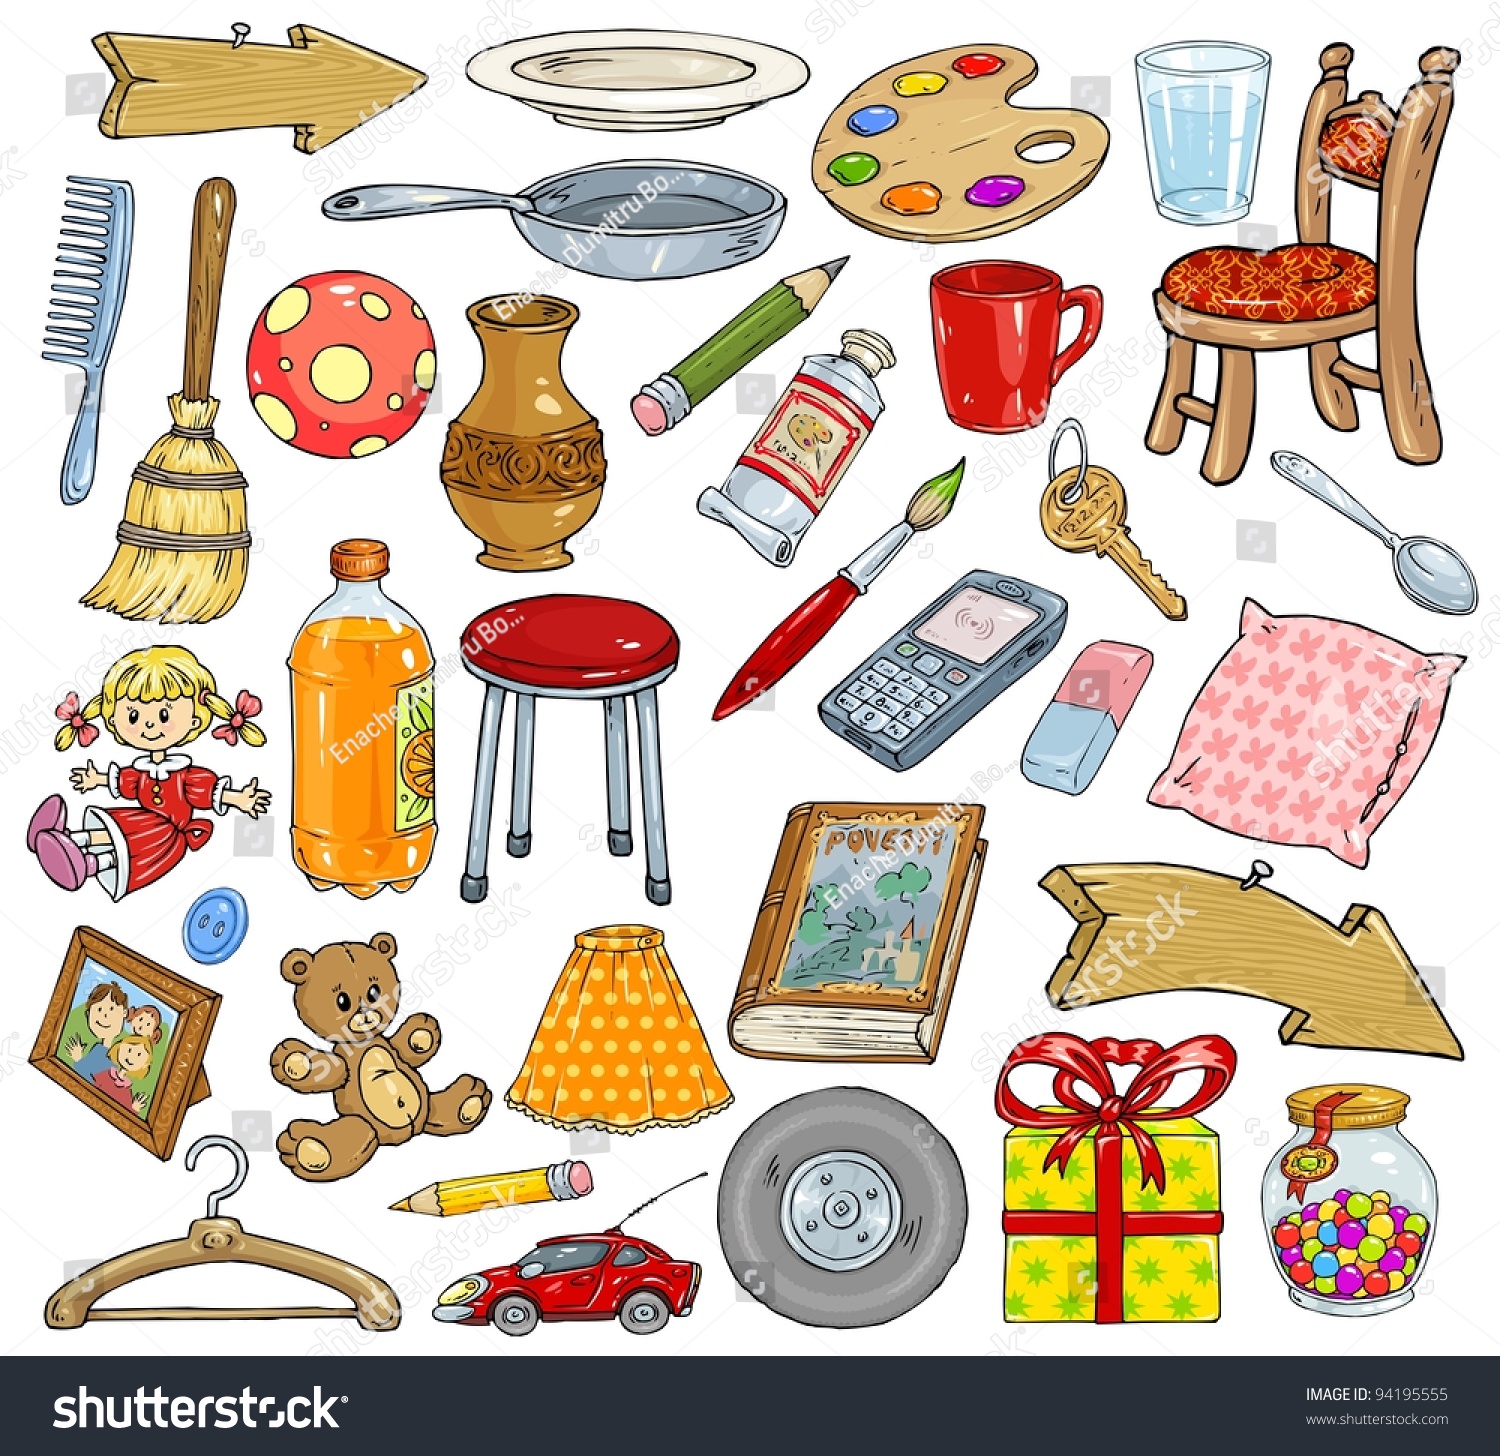 objects clipart images - photo #39